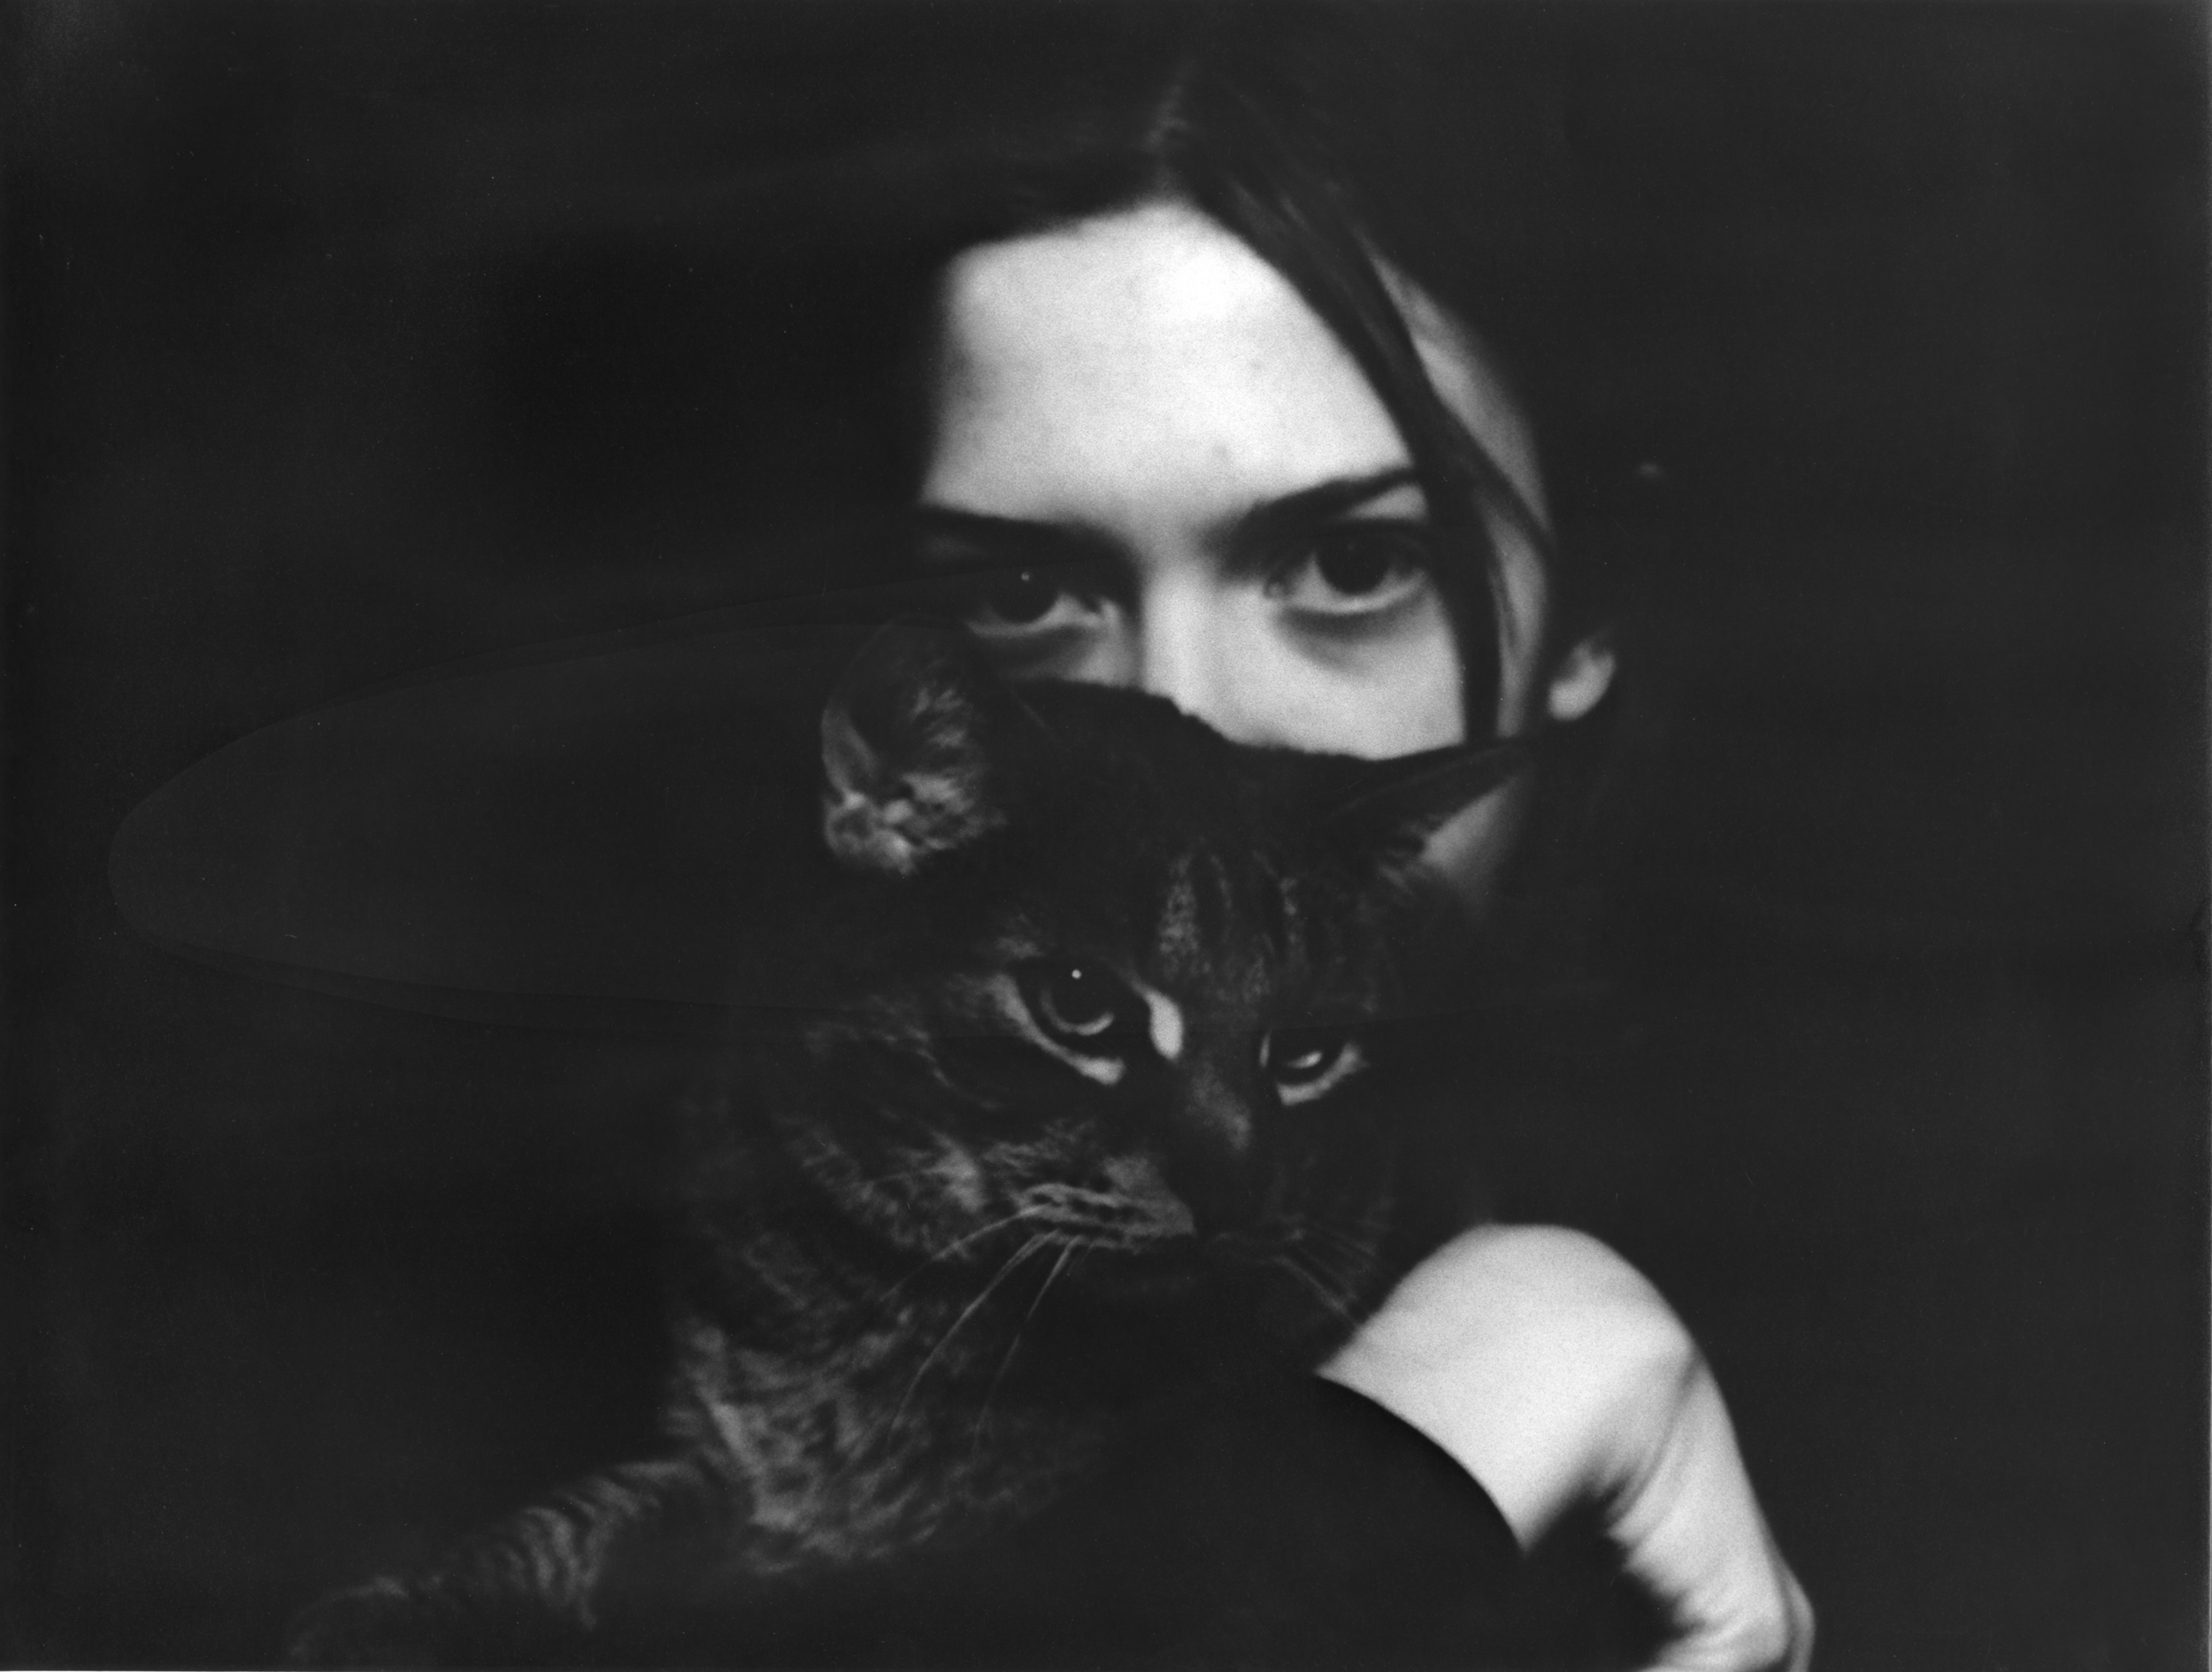 Black and white gelatin silver print of a woman whose face is partially covered by a cat that she is holding; onlye her eyes are visible. Her eyes stare accusingly out at the viewer, while the cat is distracted by something off-camera